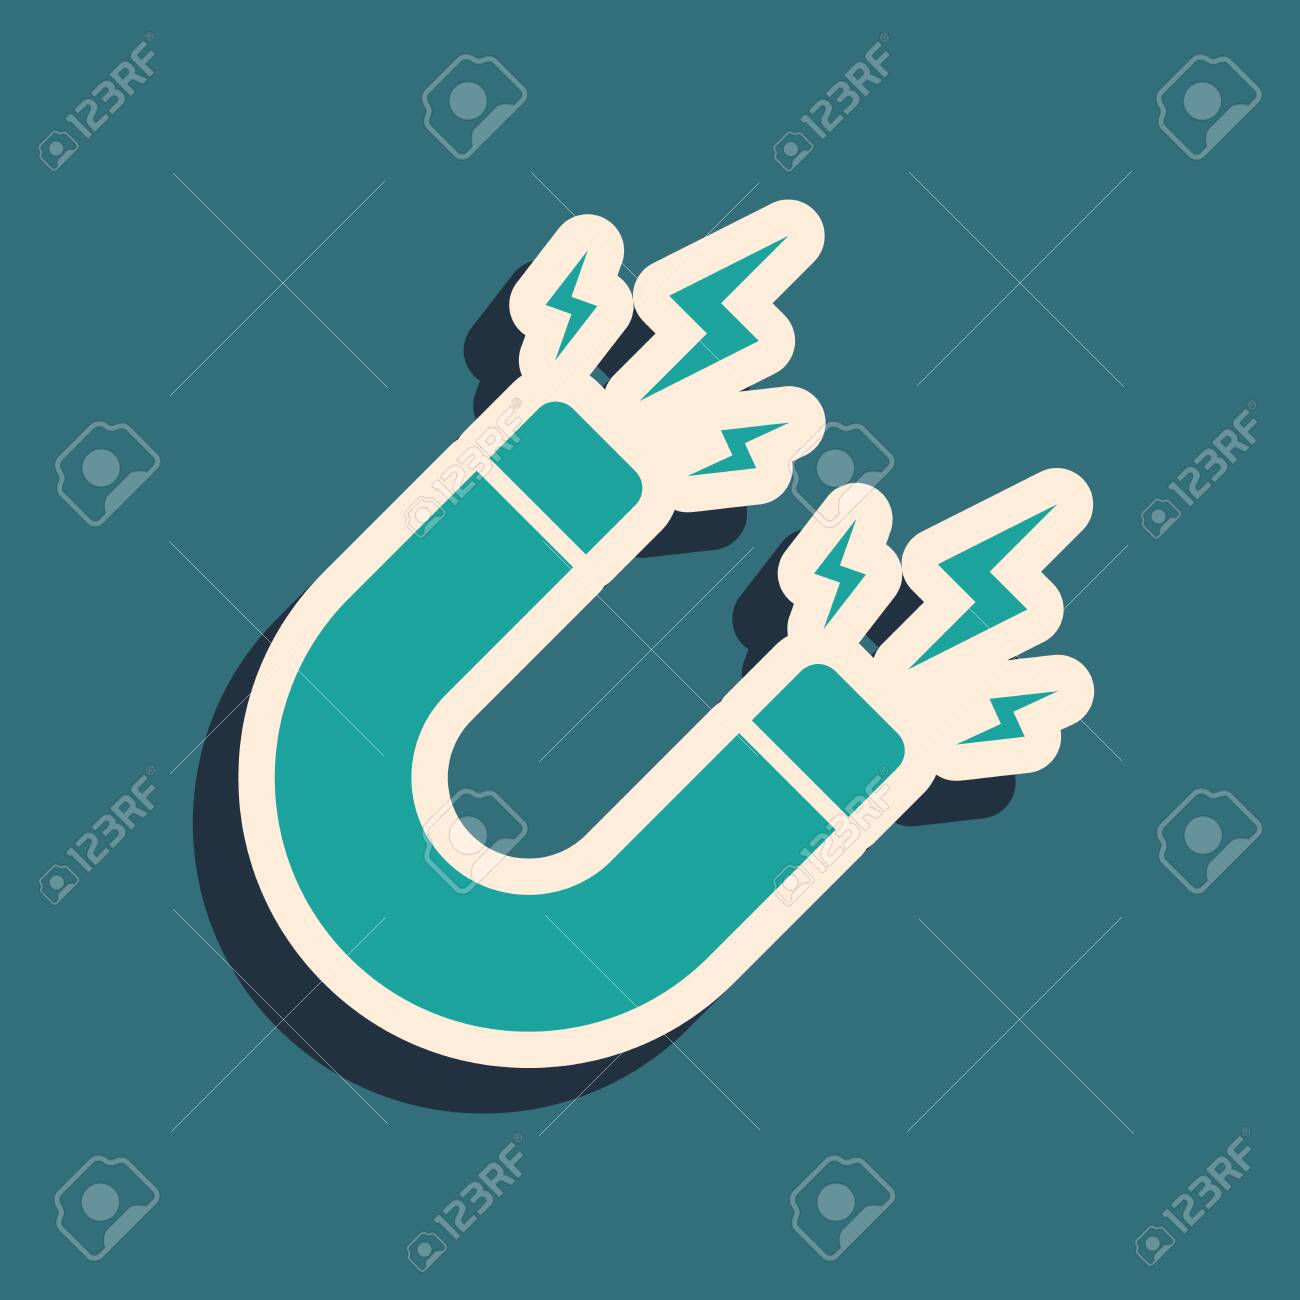 Green Magnet With Lightning Icon Isolated On Blue Background